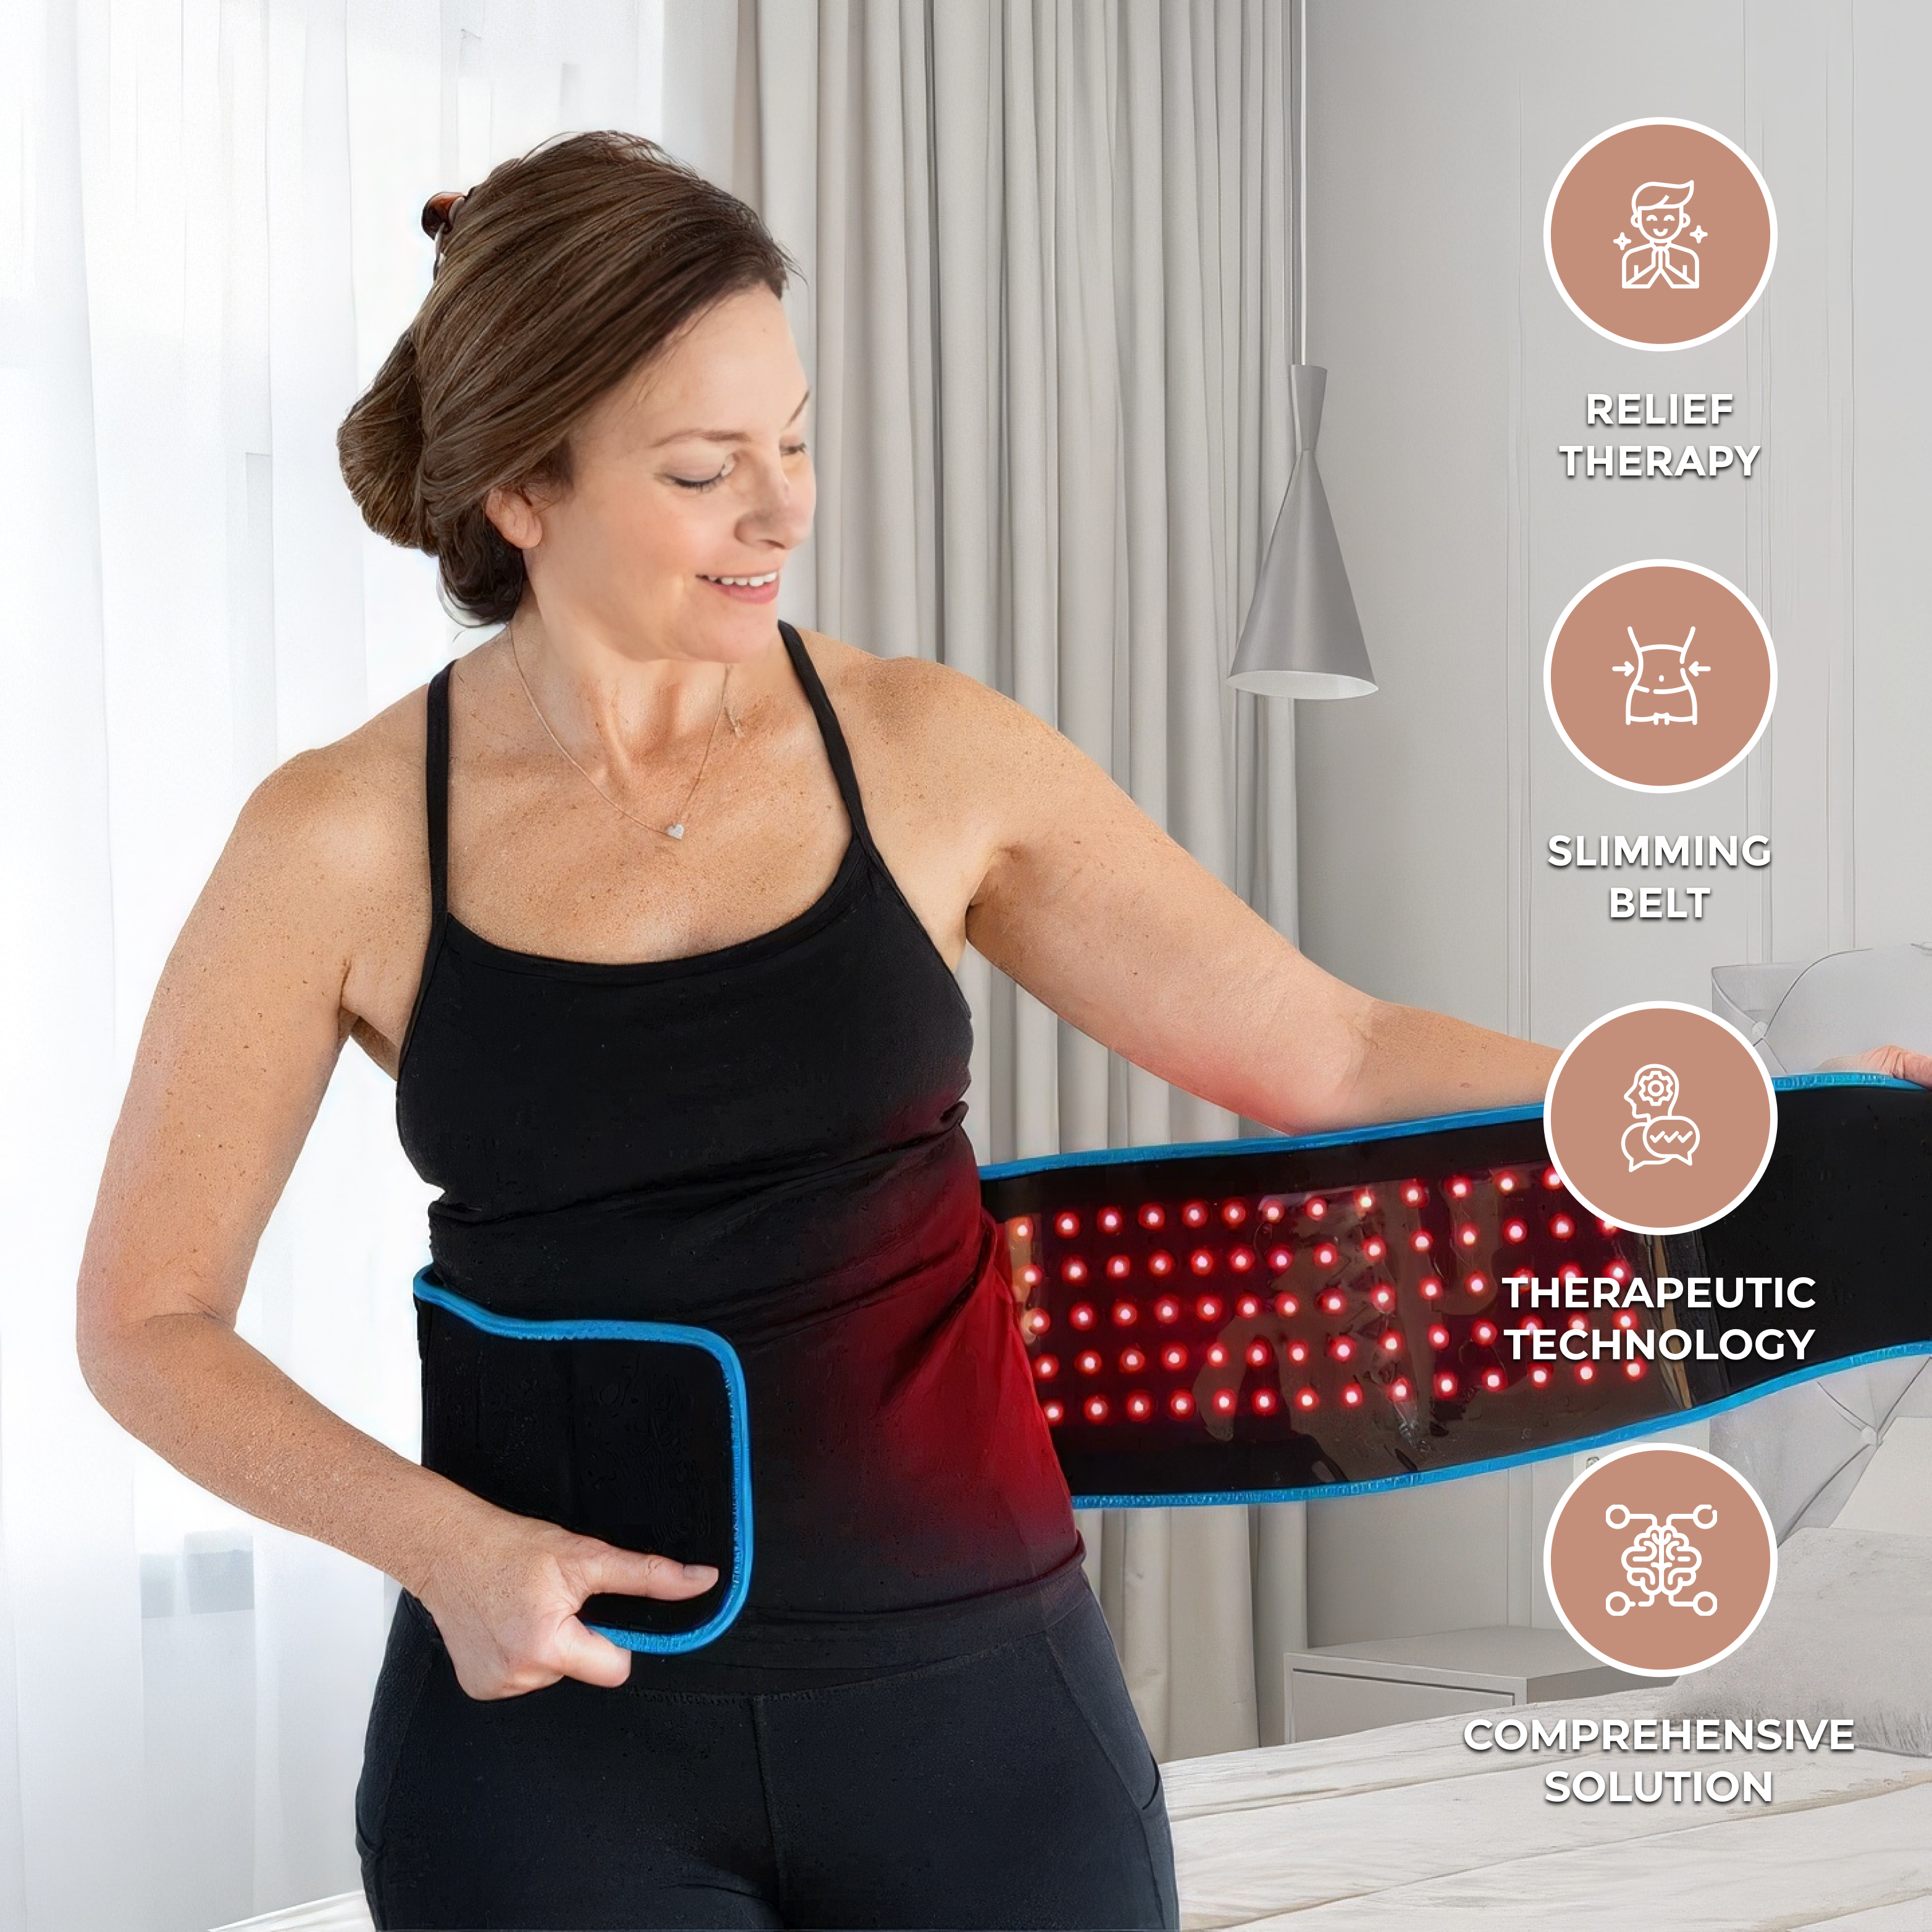 ThermaLight360™: Relief and Slimming Therapy Belt